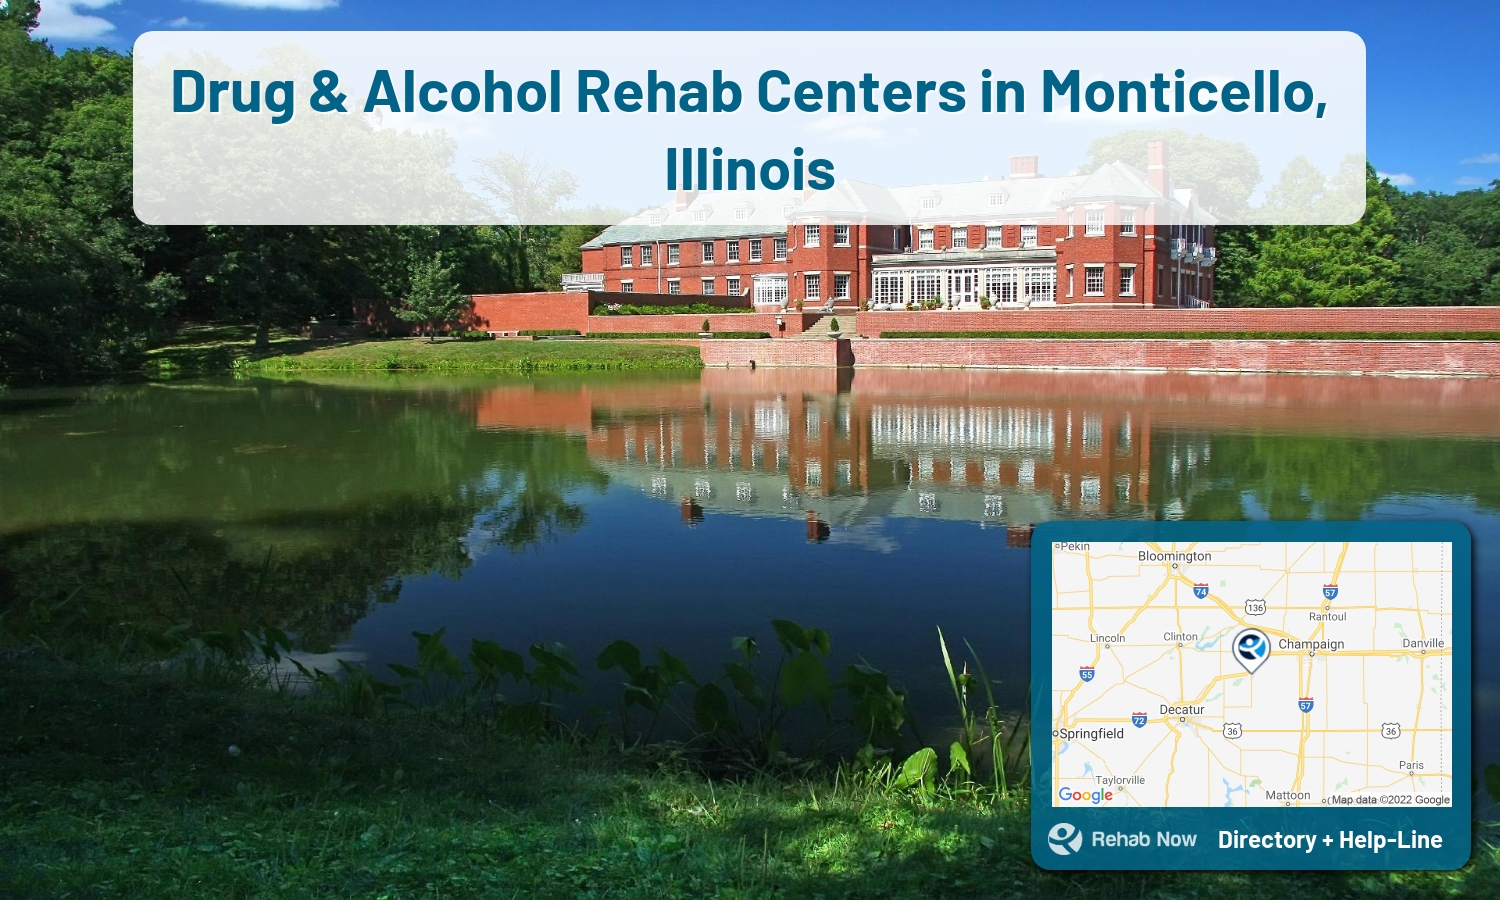 Need treatment nearby in Monticello, Illinois? Choose a drug/alcohol rehab center from our list, or call our hotline now for free help.